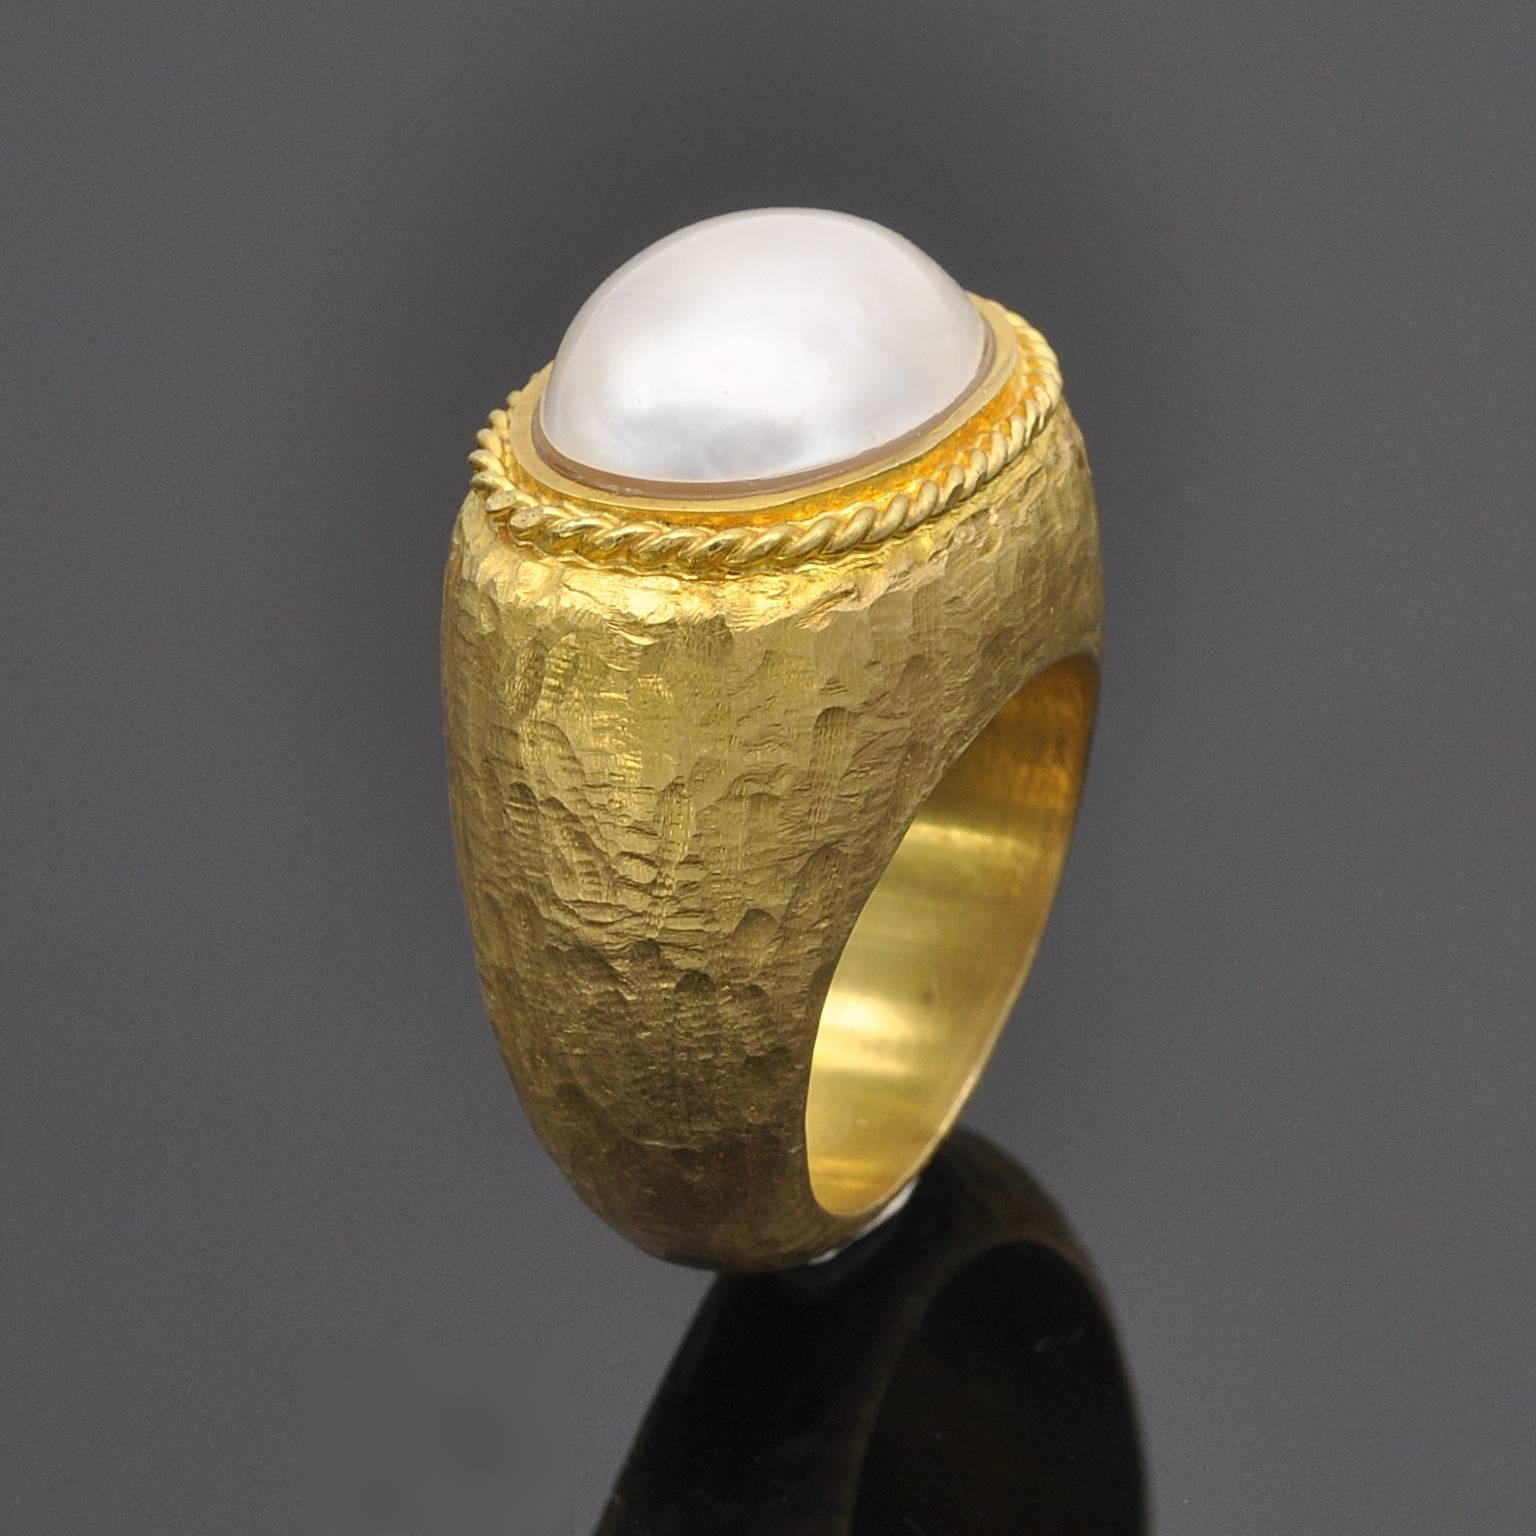 Gorgeous Ring which design was influenced by ancient greece. A large oval mabe ( 15x11mm ) pearl circled by "twisted rope " motif . The body of the ring is hammered 18KT yellow gold.